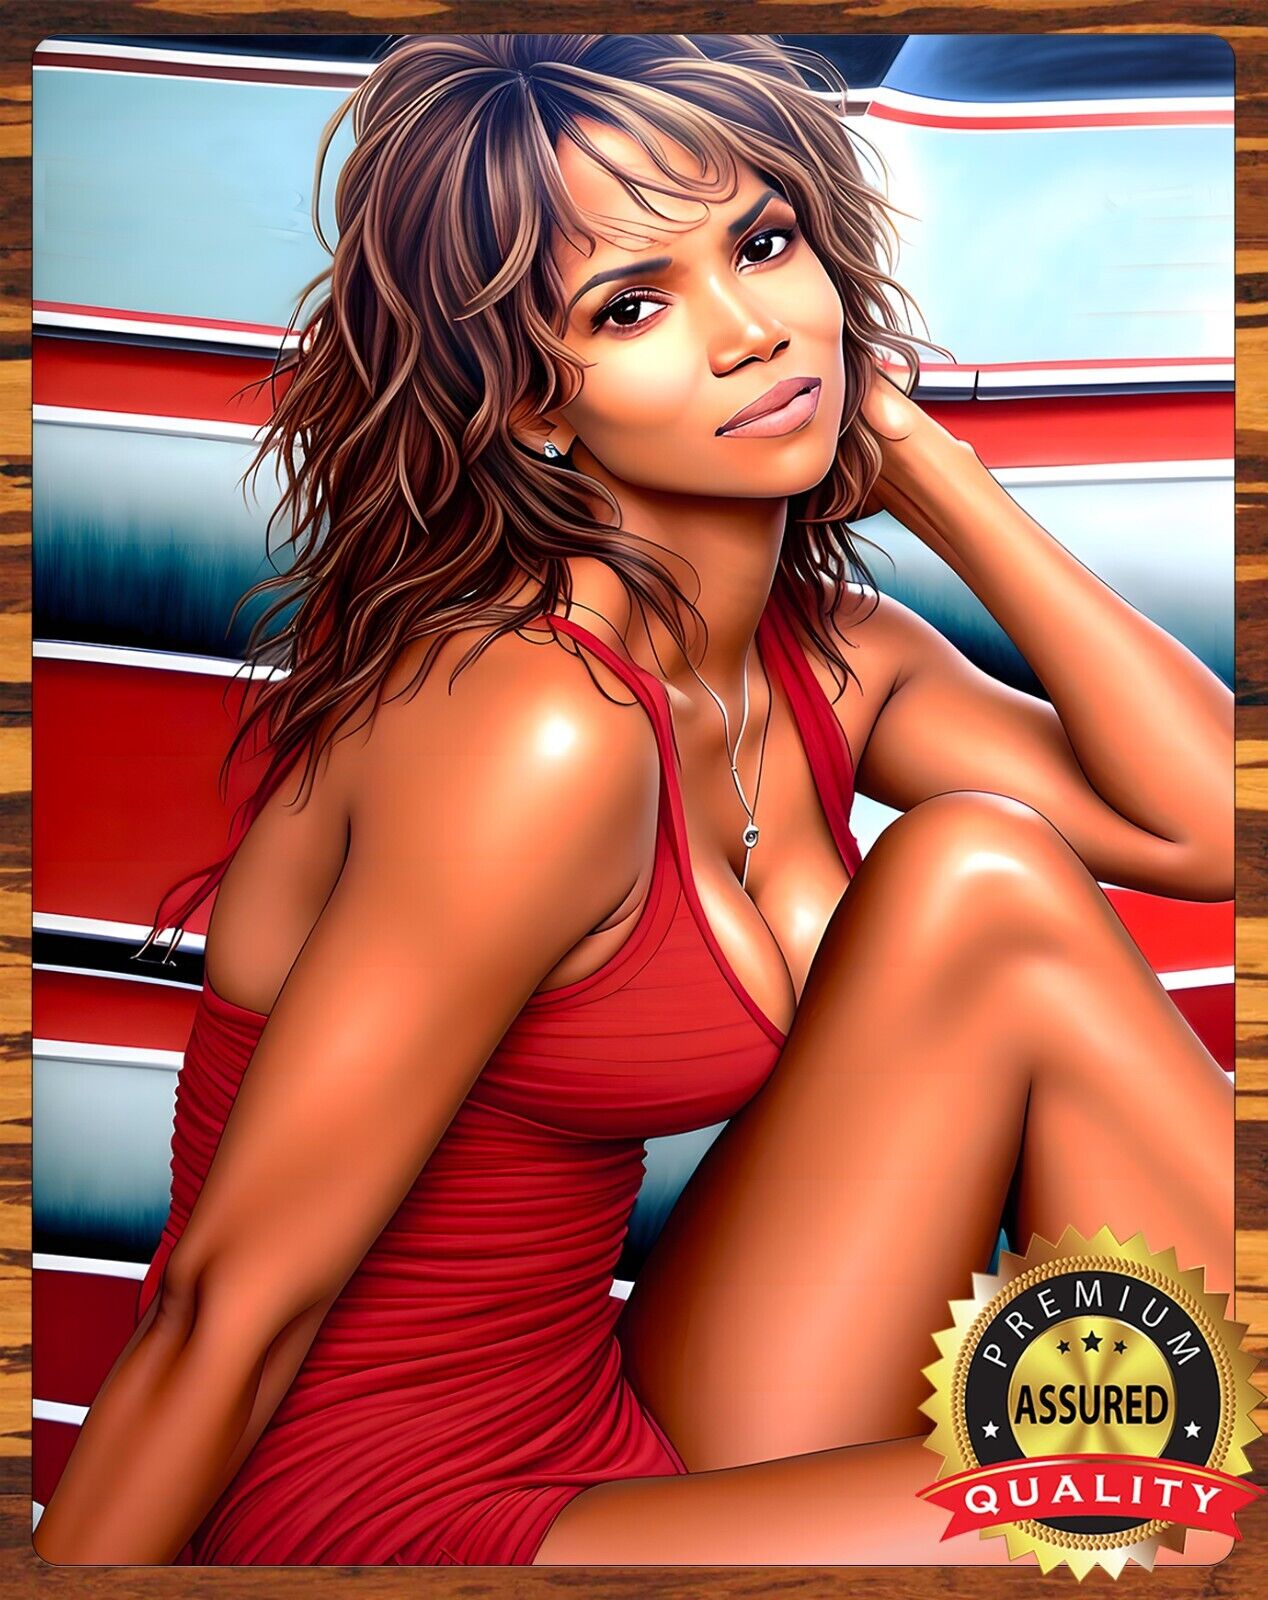 Halle Berry - Iconic Swimsuit Photo - Art To Be Signed - Metal Sign 11 x 14